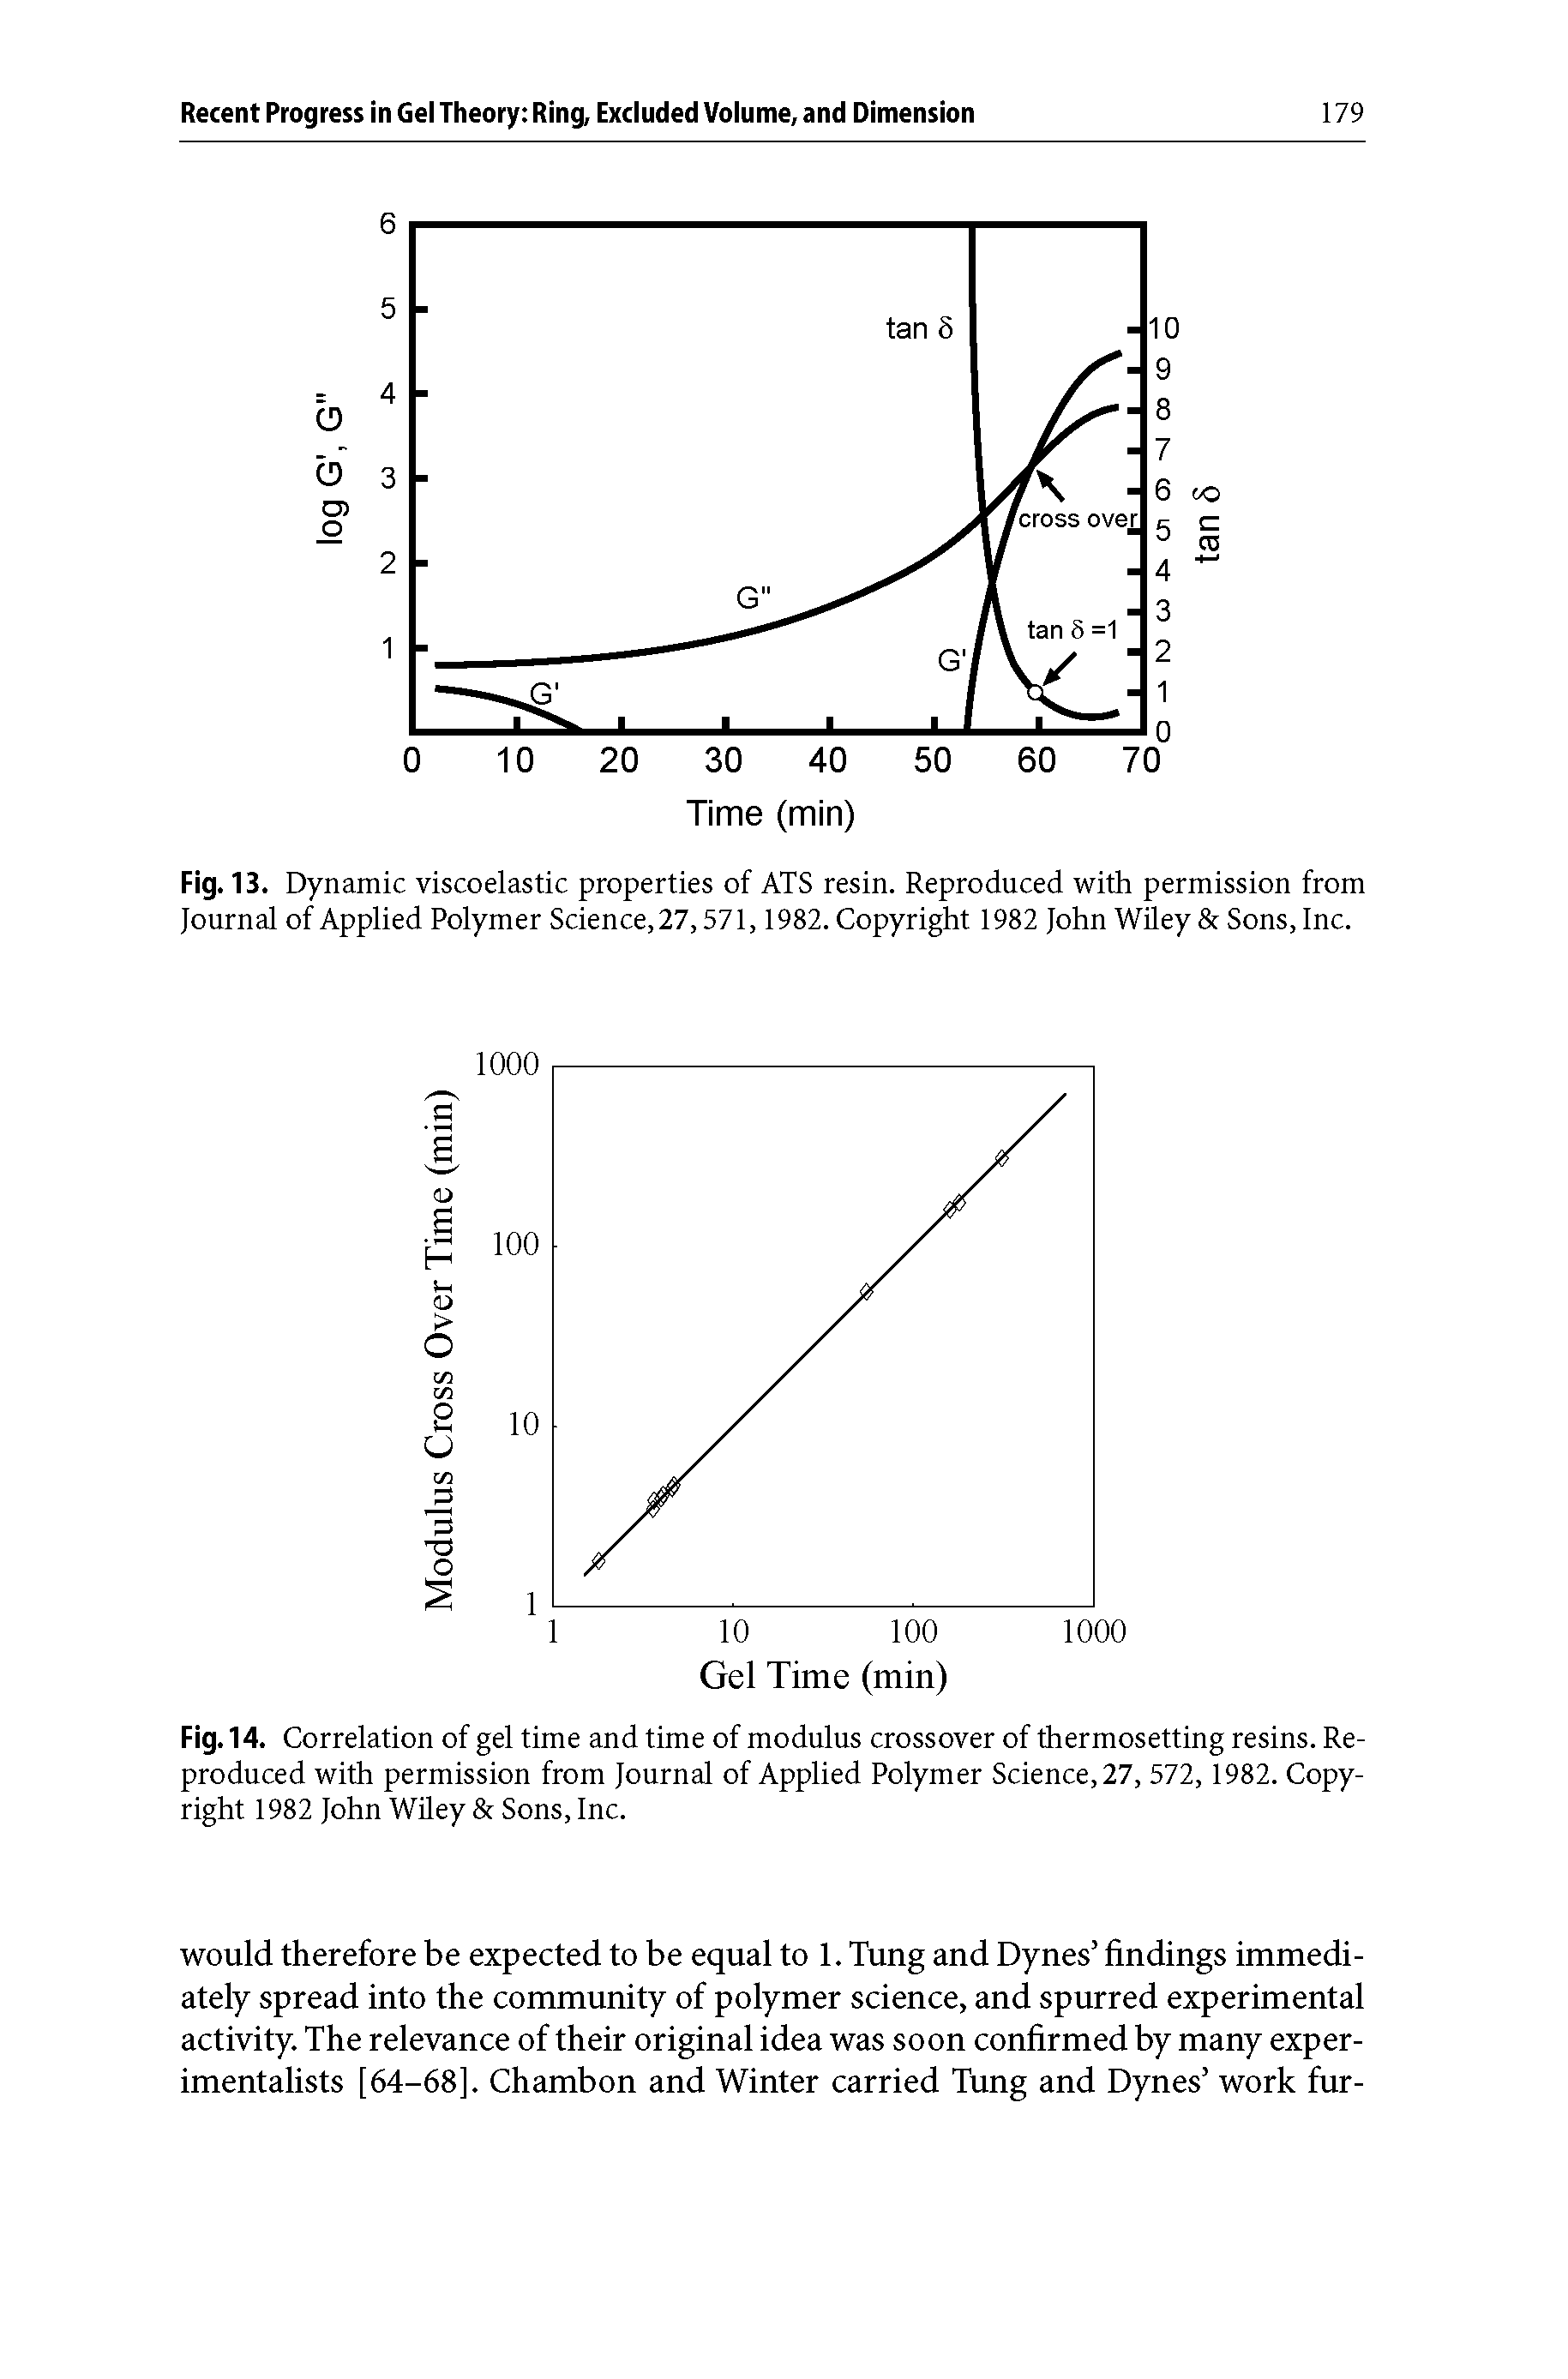 Fig. 13. Dynamic viscoelastic properties of ATS resin. Reproduced with permission from Journal of Applied Polymer Science, 27,571,1982. Copyright 1982 John Wiley Sons, Inc.